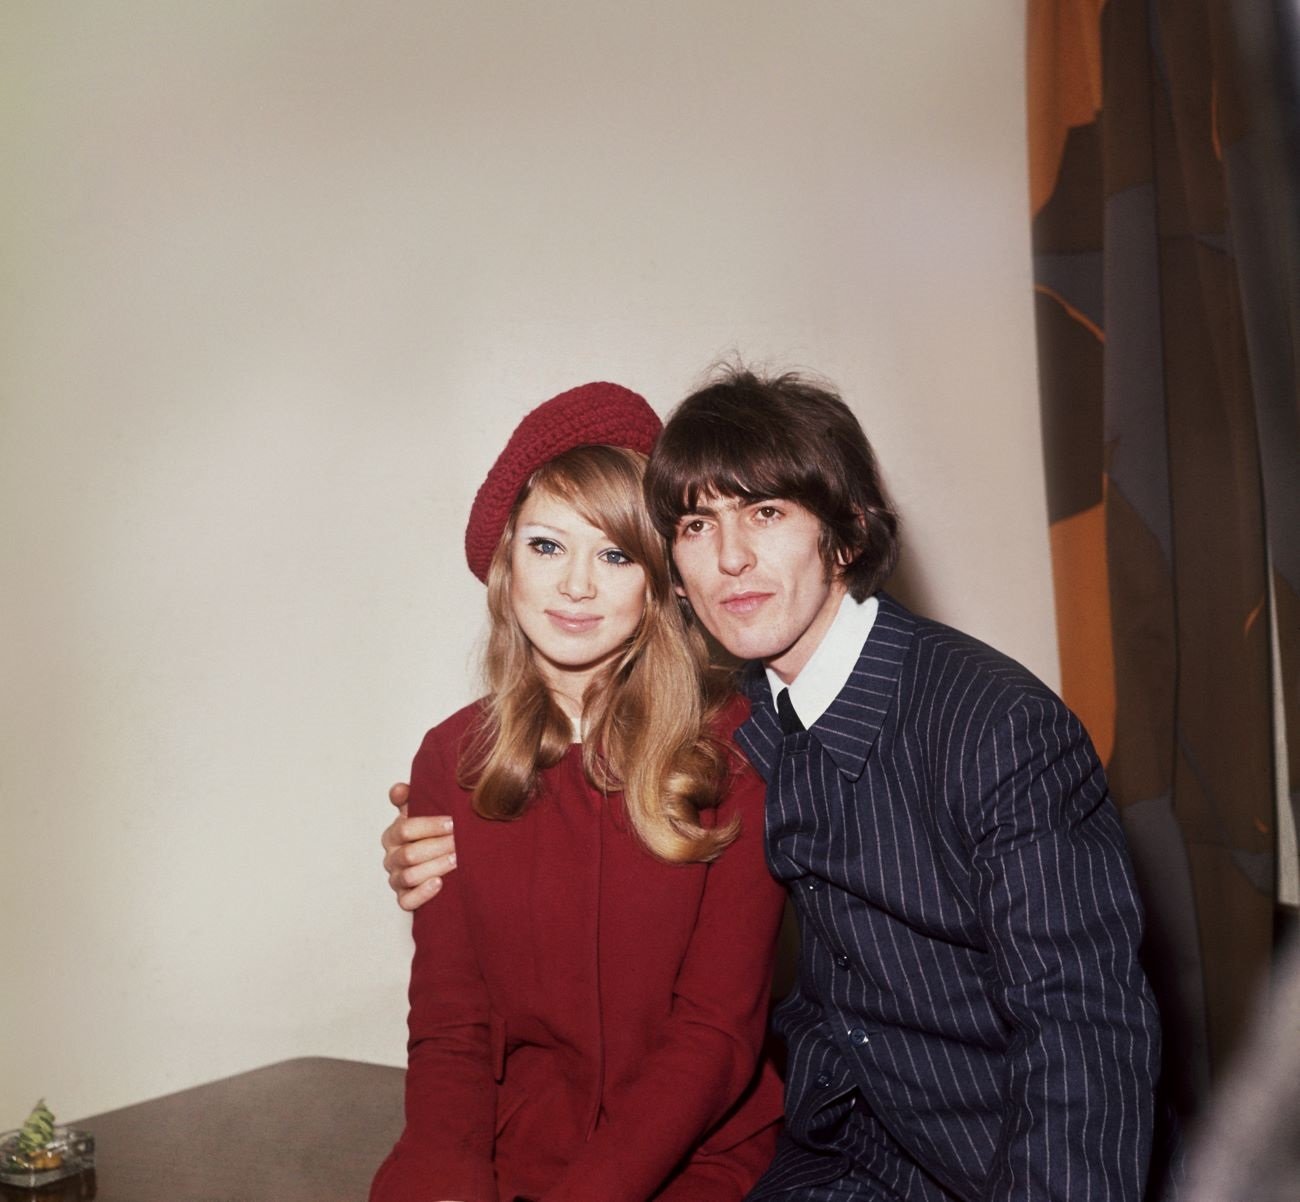 George Harrison sits with his arm around Pattie Boyd's shoulders.